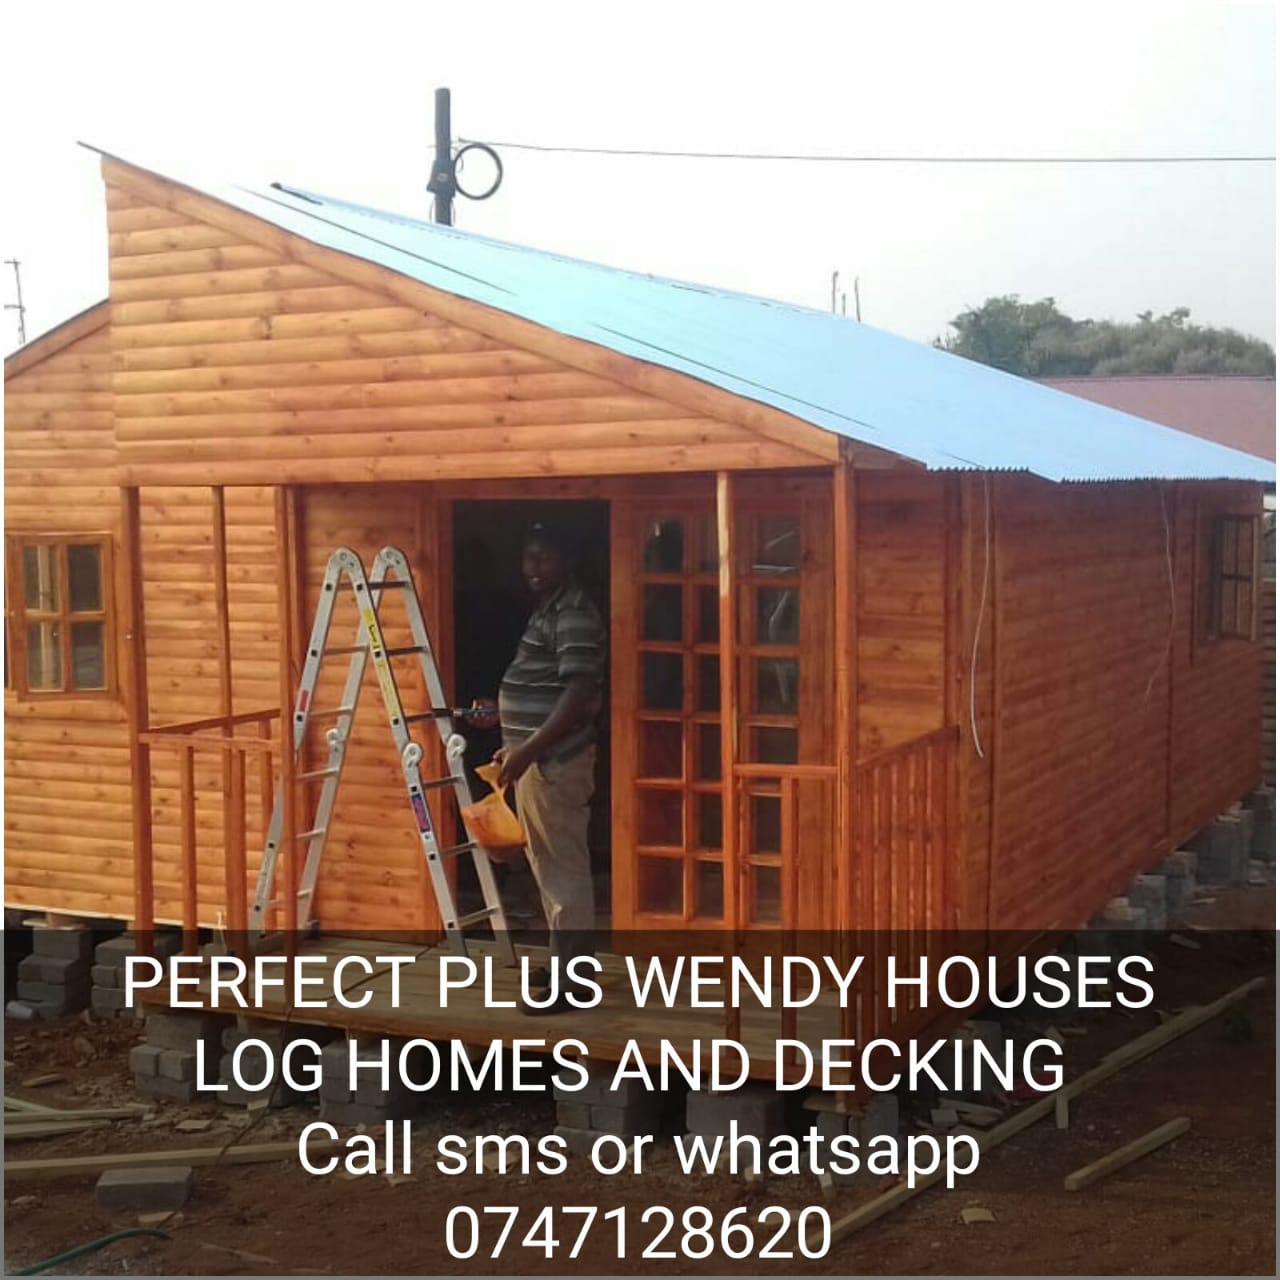 Wendy Houses and Log Homes and Deckings